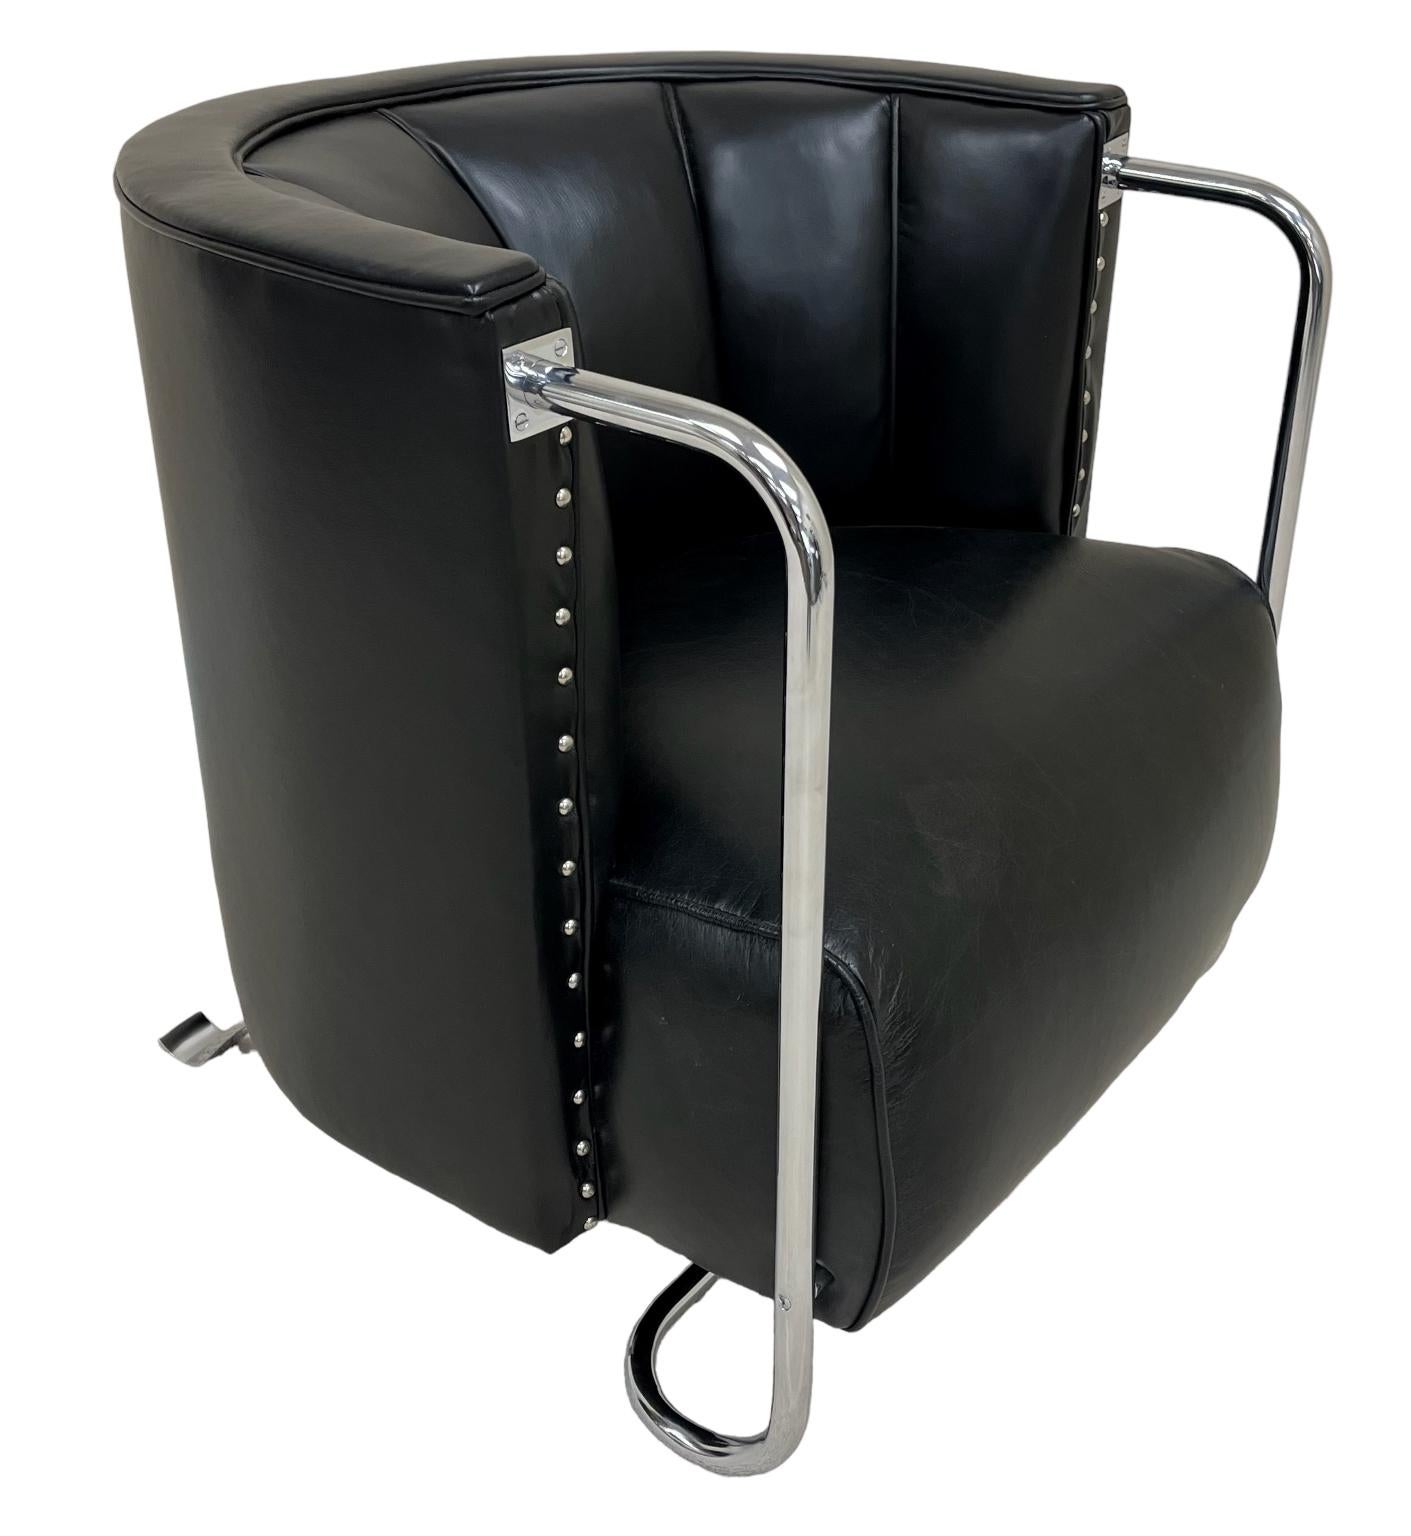 Rare Gilbert Rohde Chair for the Troy Sunshade Company. The simple design was from the Troy Sunshade living room collection of Modern Interiors. Beautifully reupholstered in a soft black leather with stunning new chrome plating. An example of the